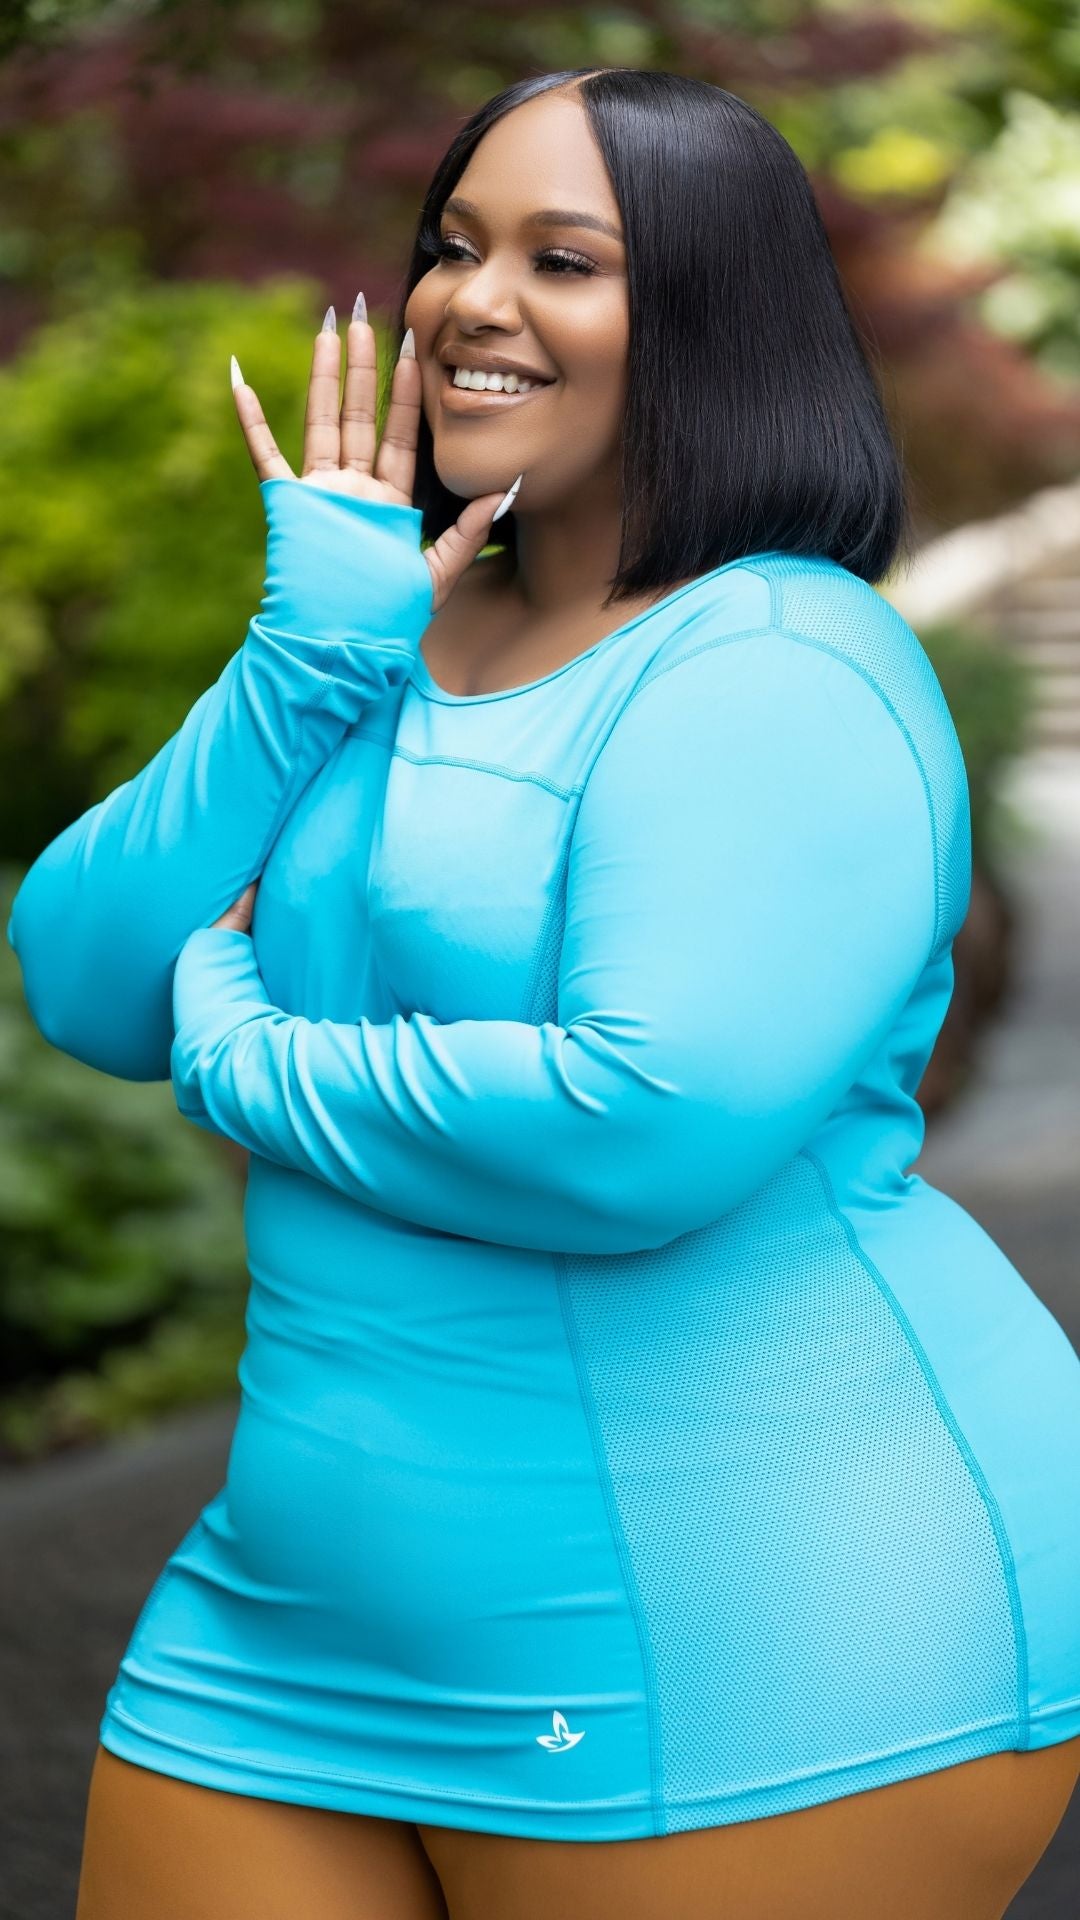 Breathable and comfortable 💕 #tamelamann #tamelamanncollection